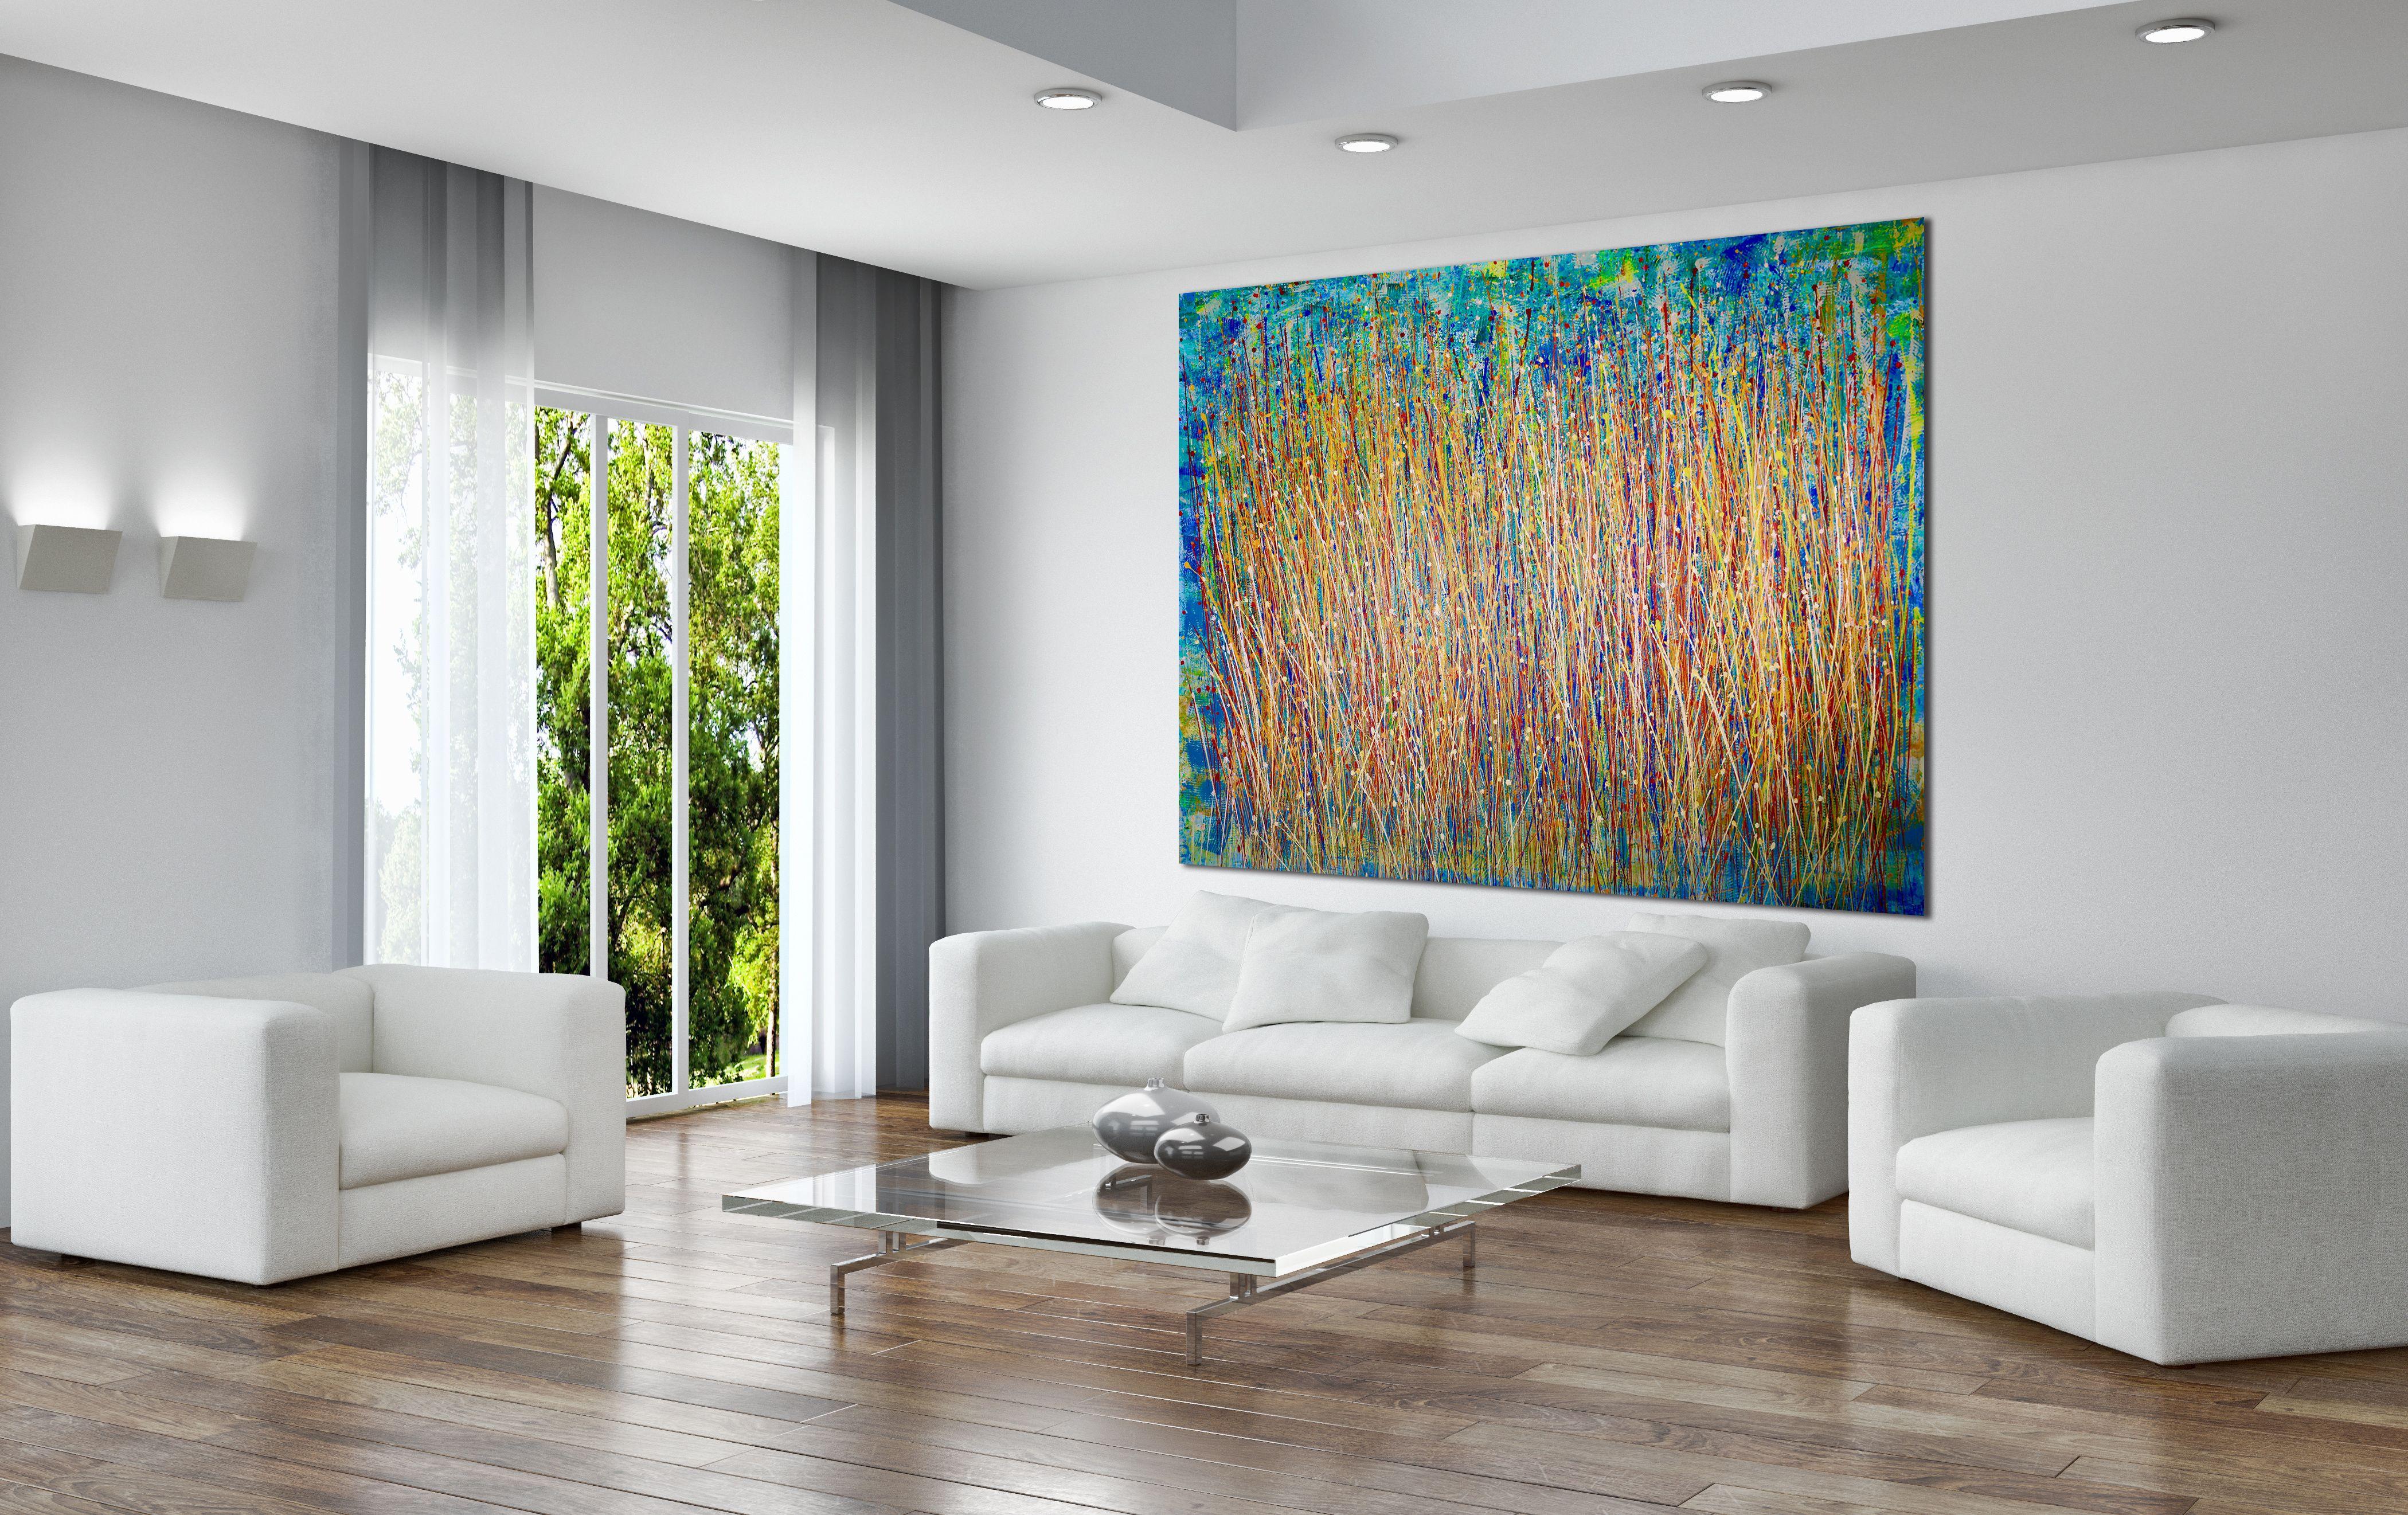 Oversized bold and very detailed piece with contrasting color blending, lots of drips and big palette knife strokes. This painting was completed after thousands of paint strokes of many color arrange all in motion and harmony, full of light and fast